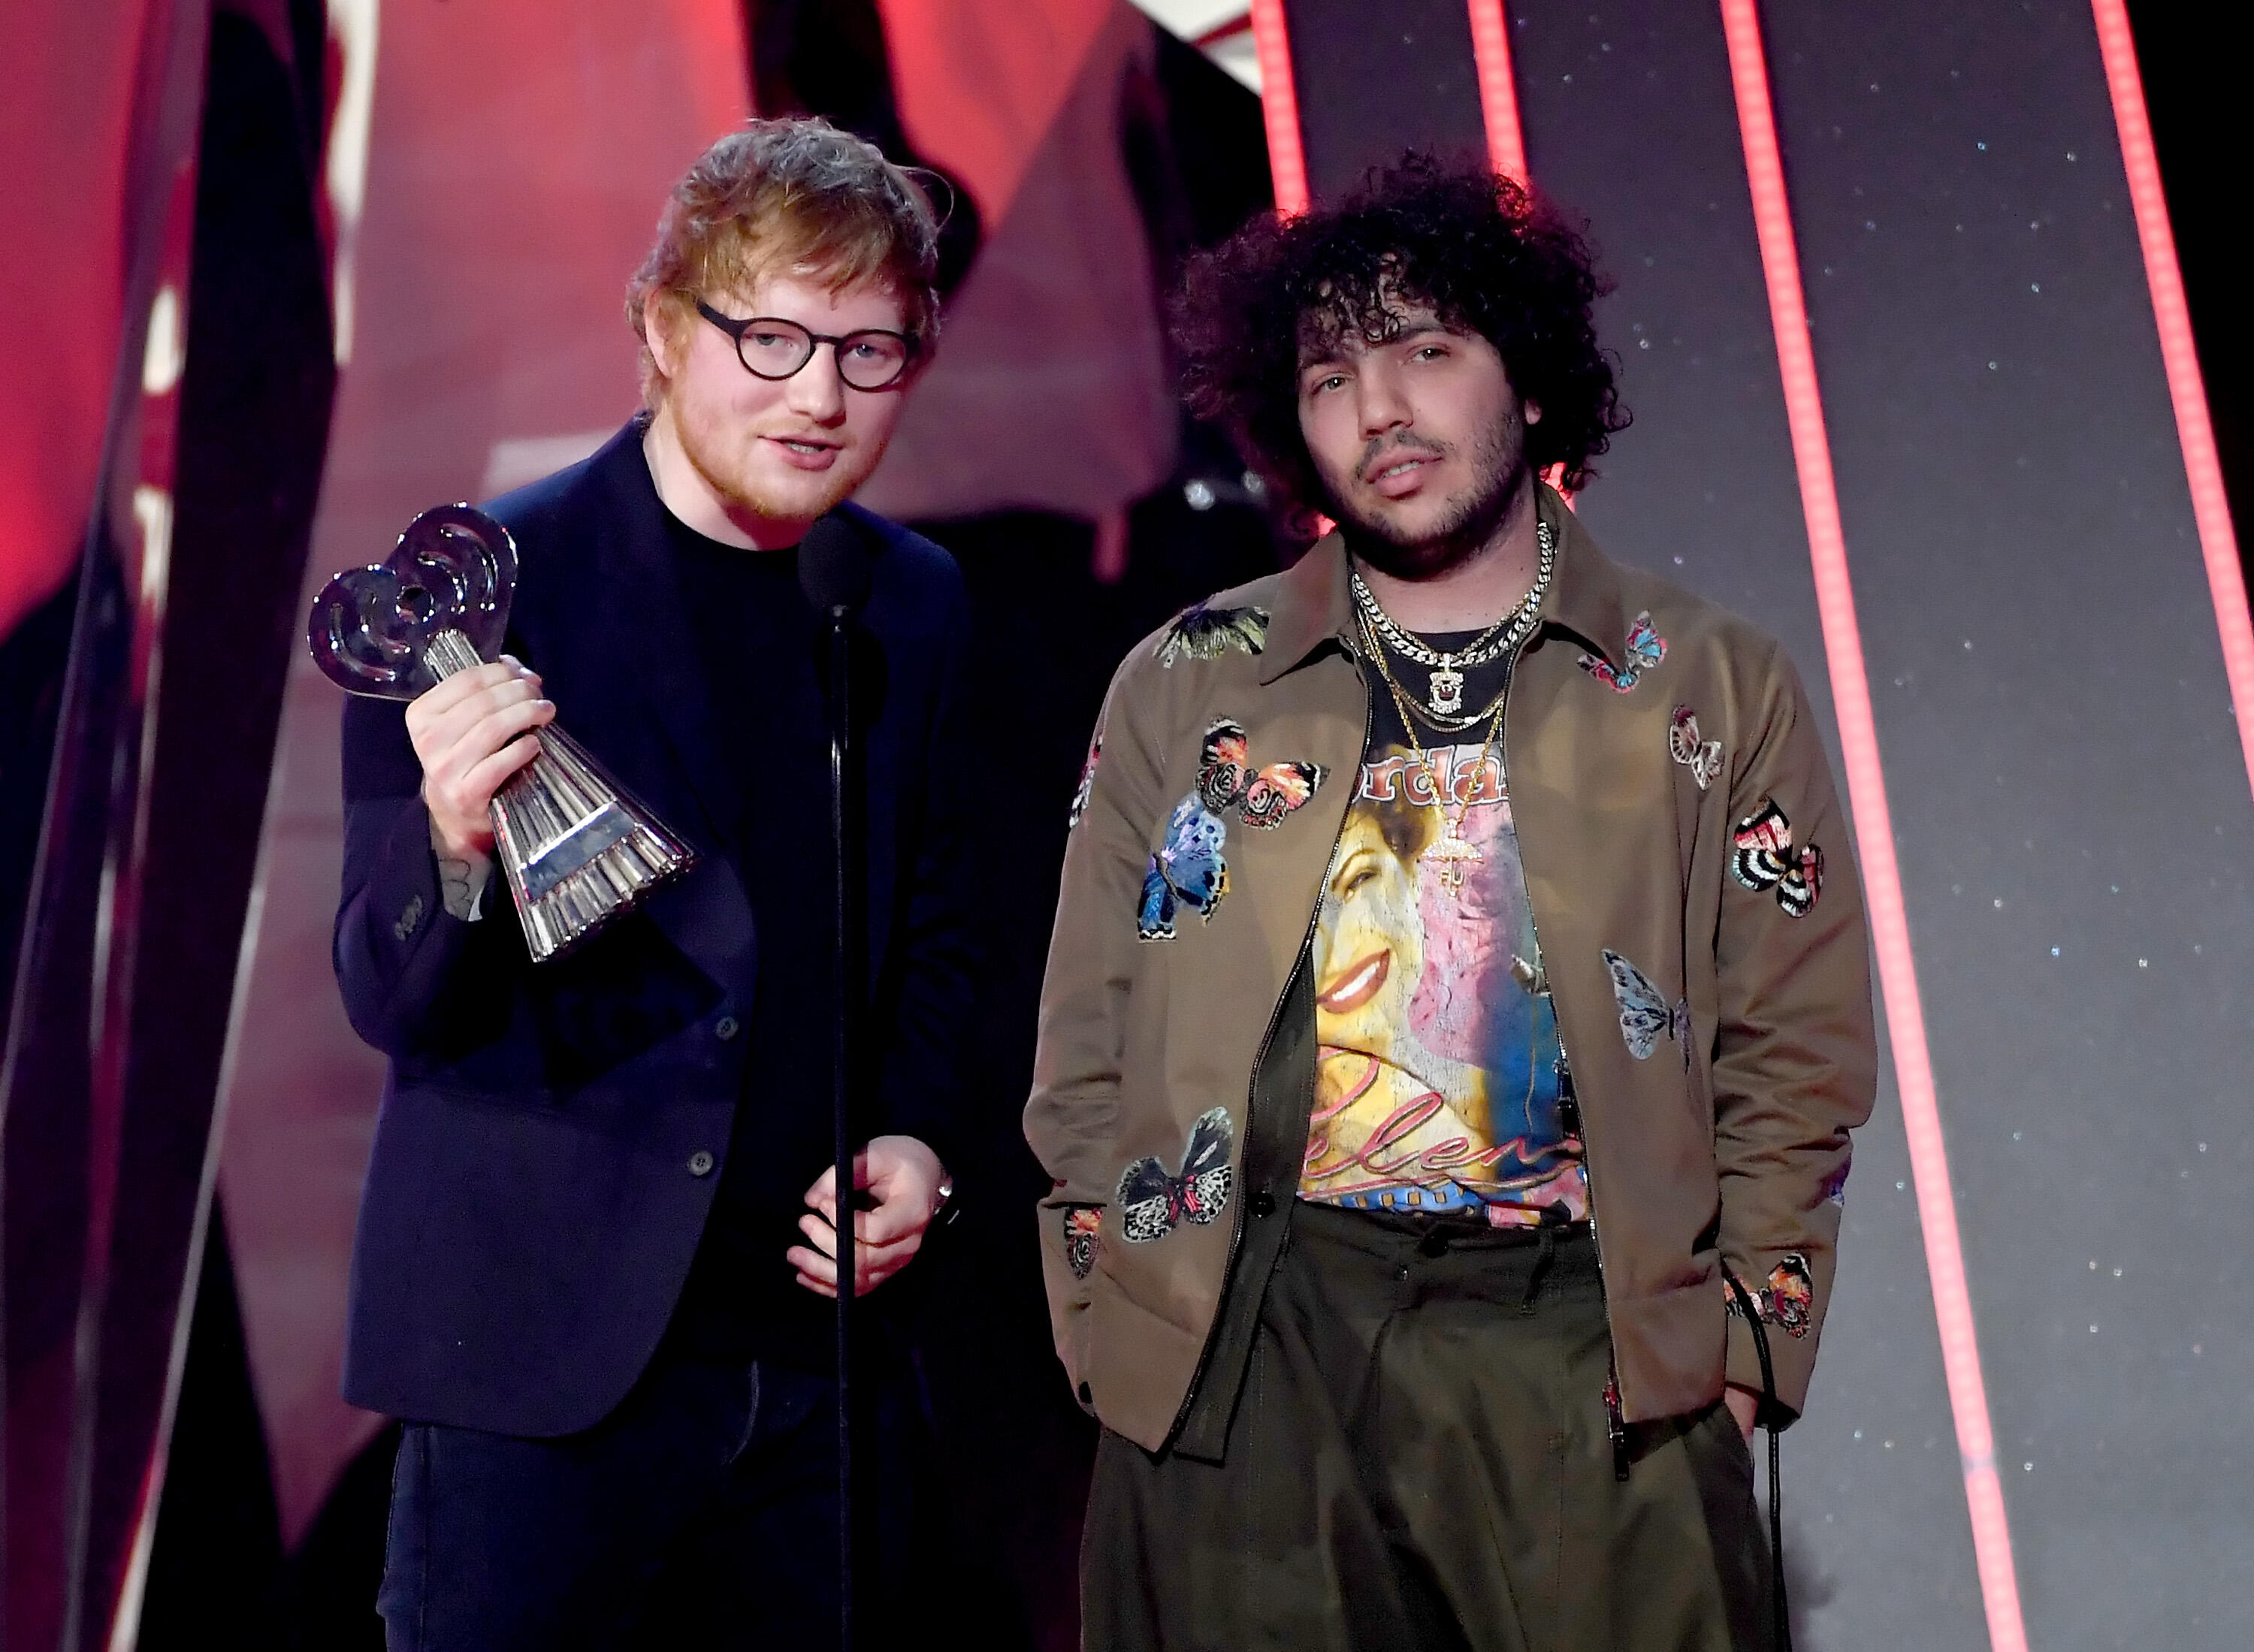 INGLEWOOD, CA - MARCH 05:  Songwriters Ed Sheeran (L) and Benny Blanco accept Best Lyrics for 'Love Yourself' (song by Justin Bieber) onstage at the 2017 iHeartRadio Music Awards which broadcast live on Turner's TBS, TNT, and truTV at The Forum on March 5